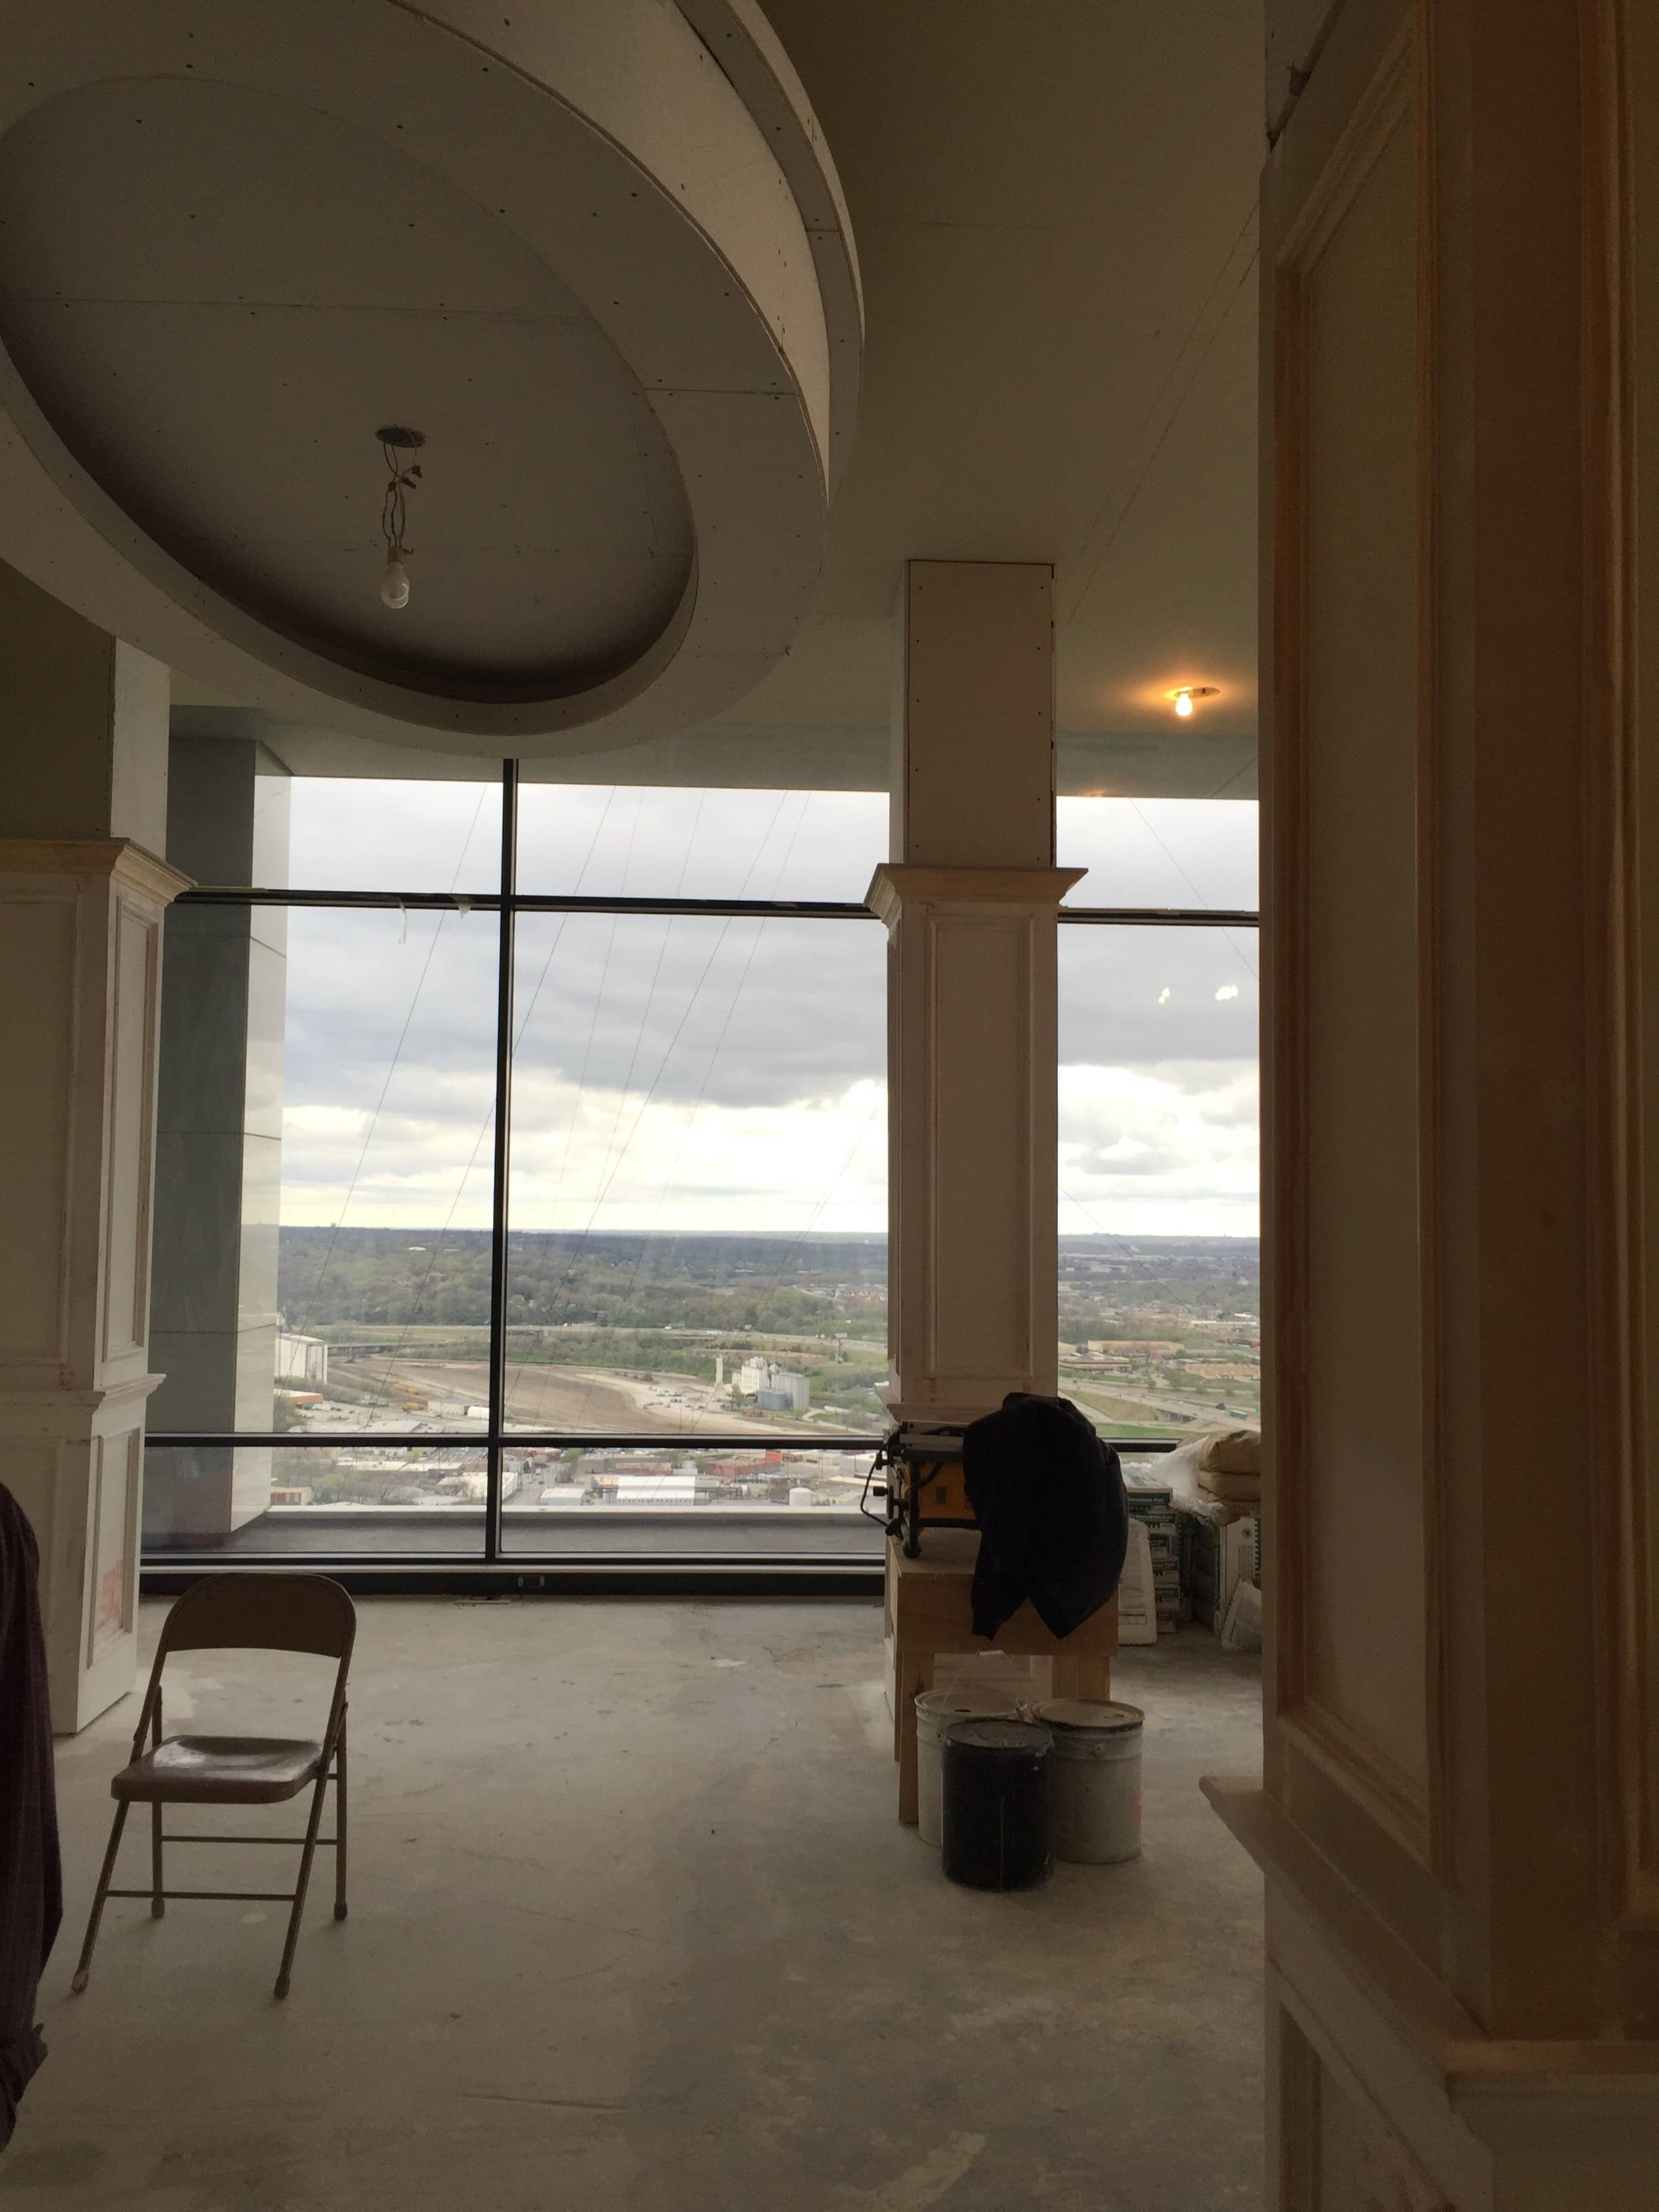 An in-progress interior design project featuring a partially constructed room with a large oval recessed ceiling. The space includes tall columns and large floor-to-ceiling windows offering expansive views of the cityscape below. The room is currently unfinished, with exposed floors and walls, construction materials, and equipment visible. A lone folding chair sits in the center of the space, indicating ongoing work and preparation for further design elements to be added. The overcast sky outside enhances the raw and developing nature of the project.